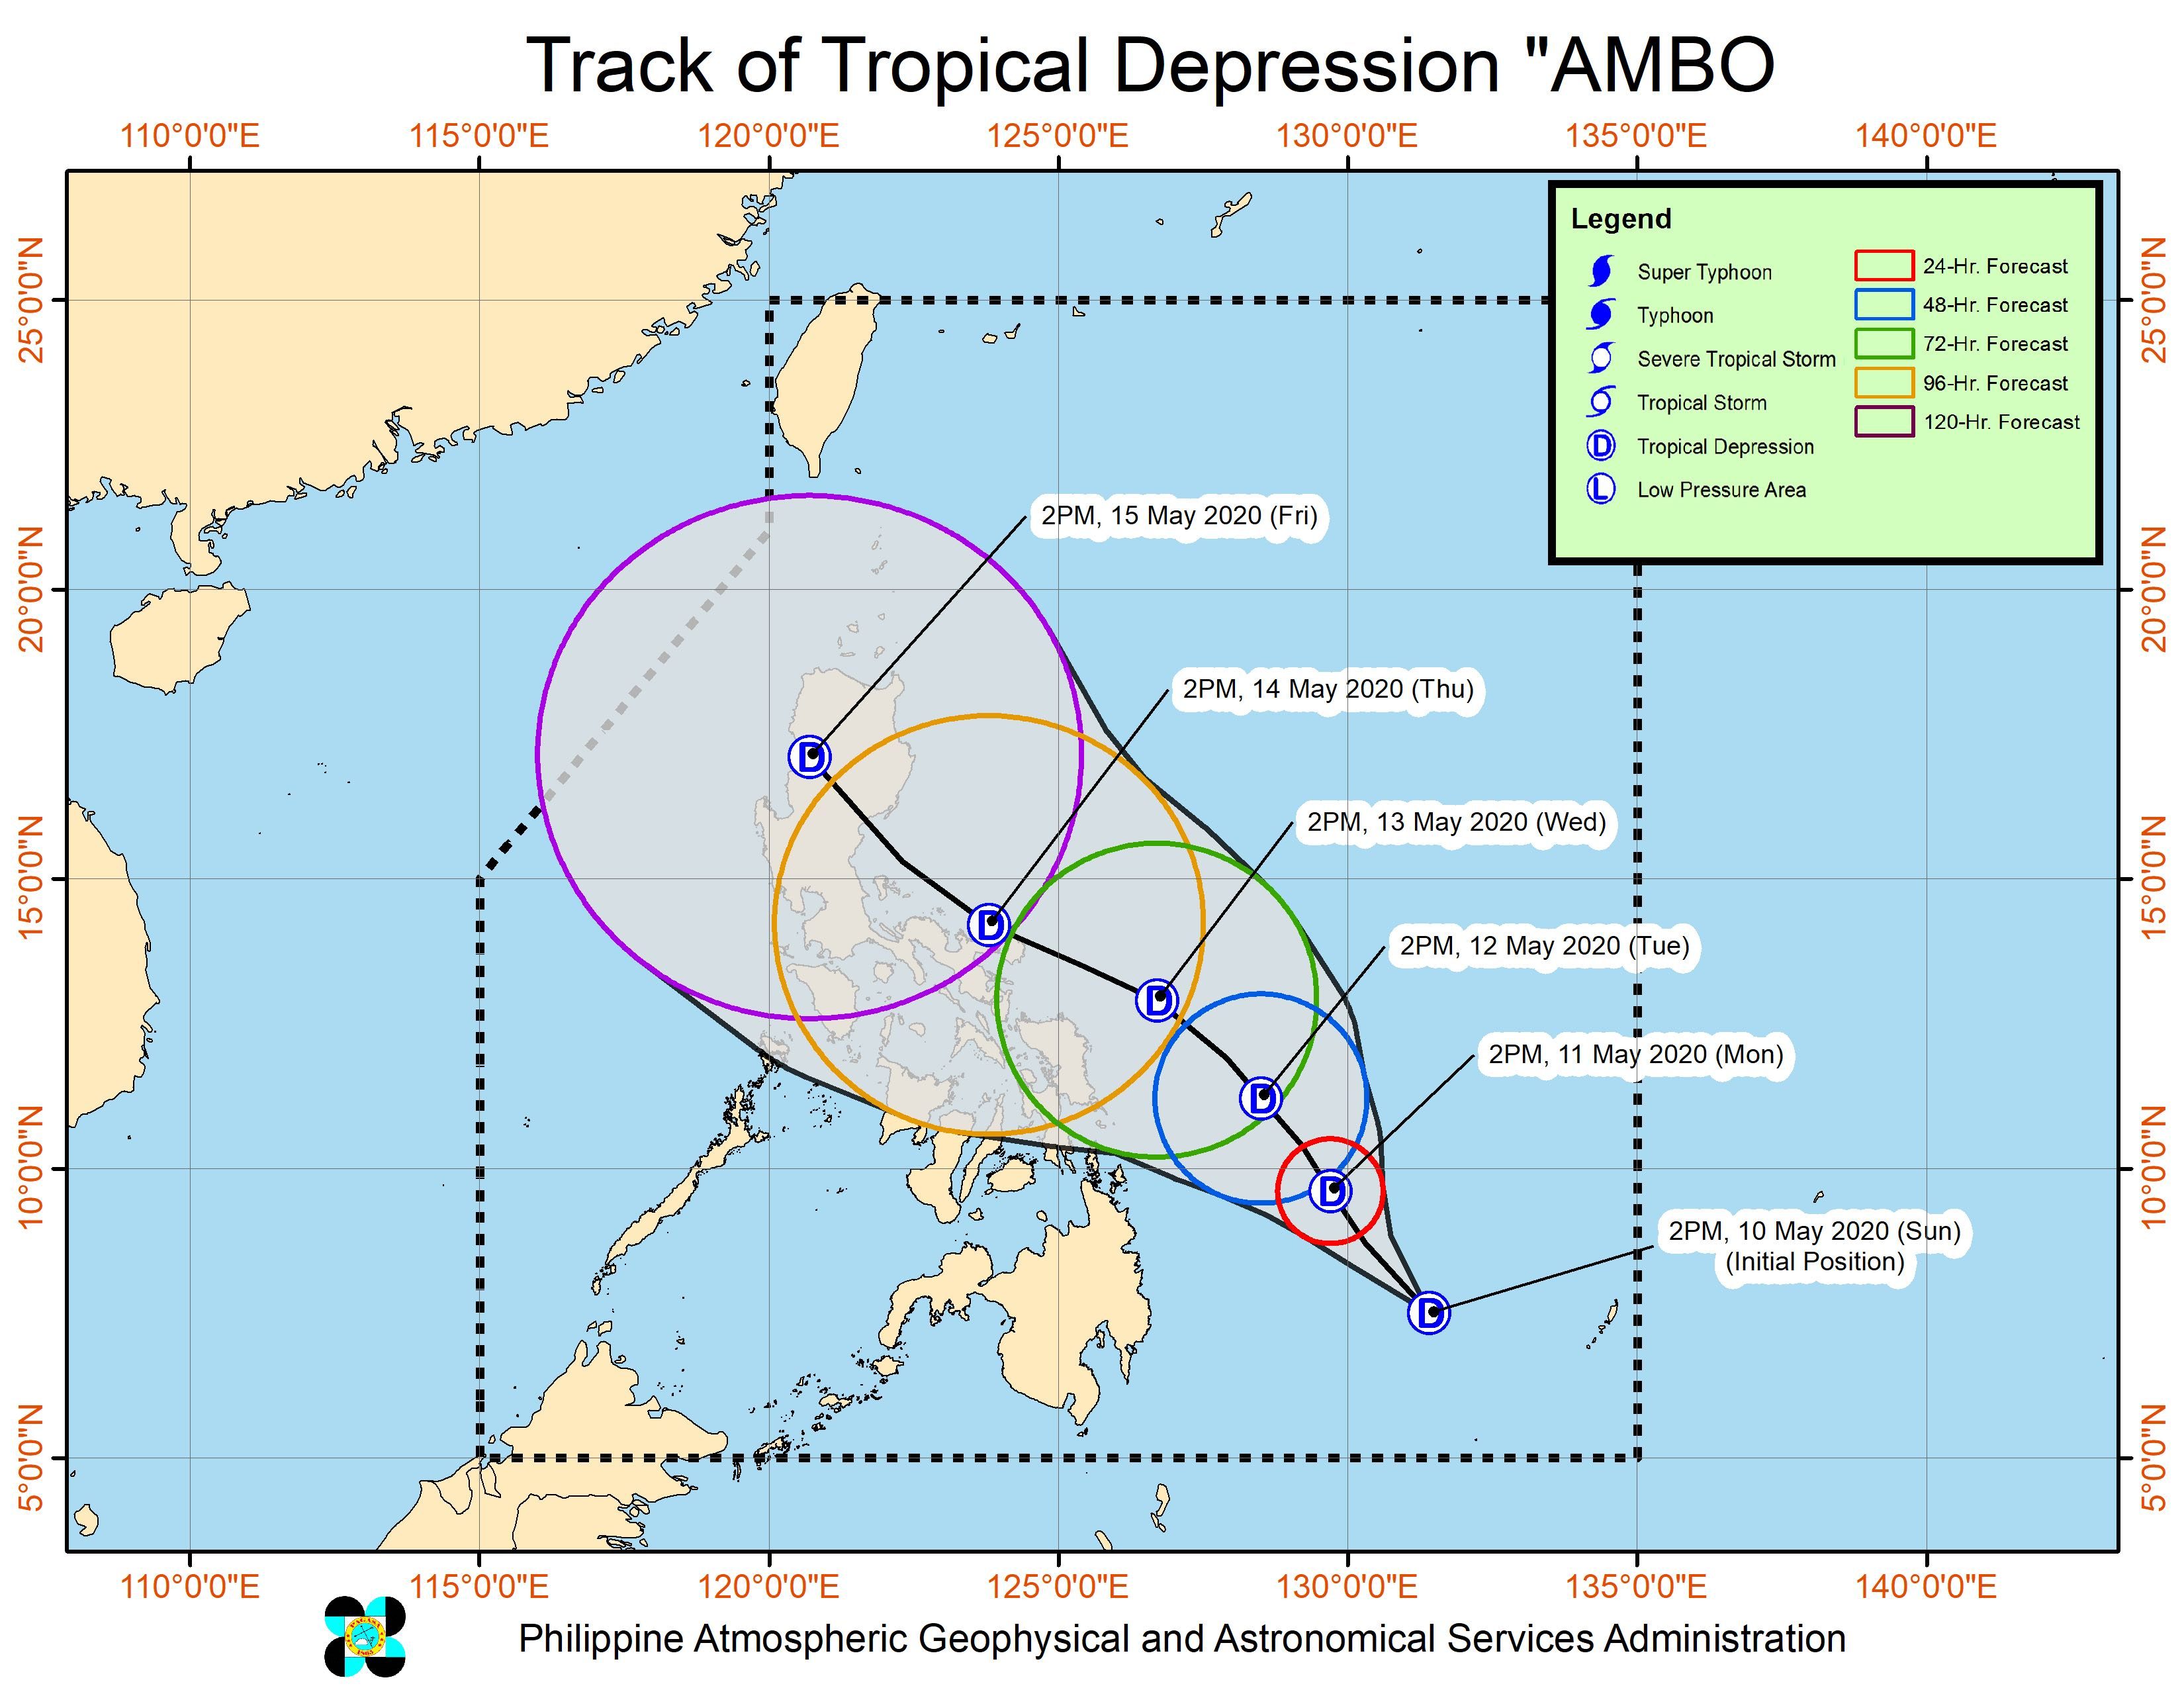 Forecast track of Tropical Depression Ambo as of May 10, 2020, 5 pm. Image from PAGASA 